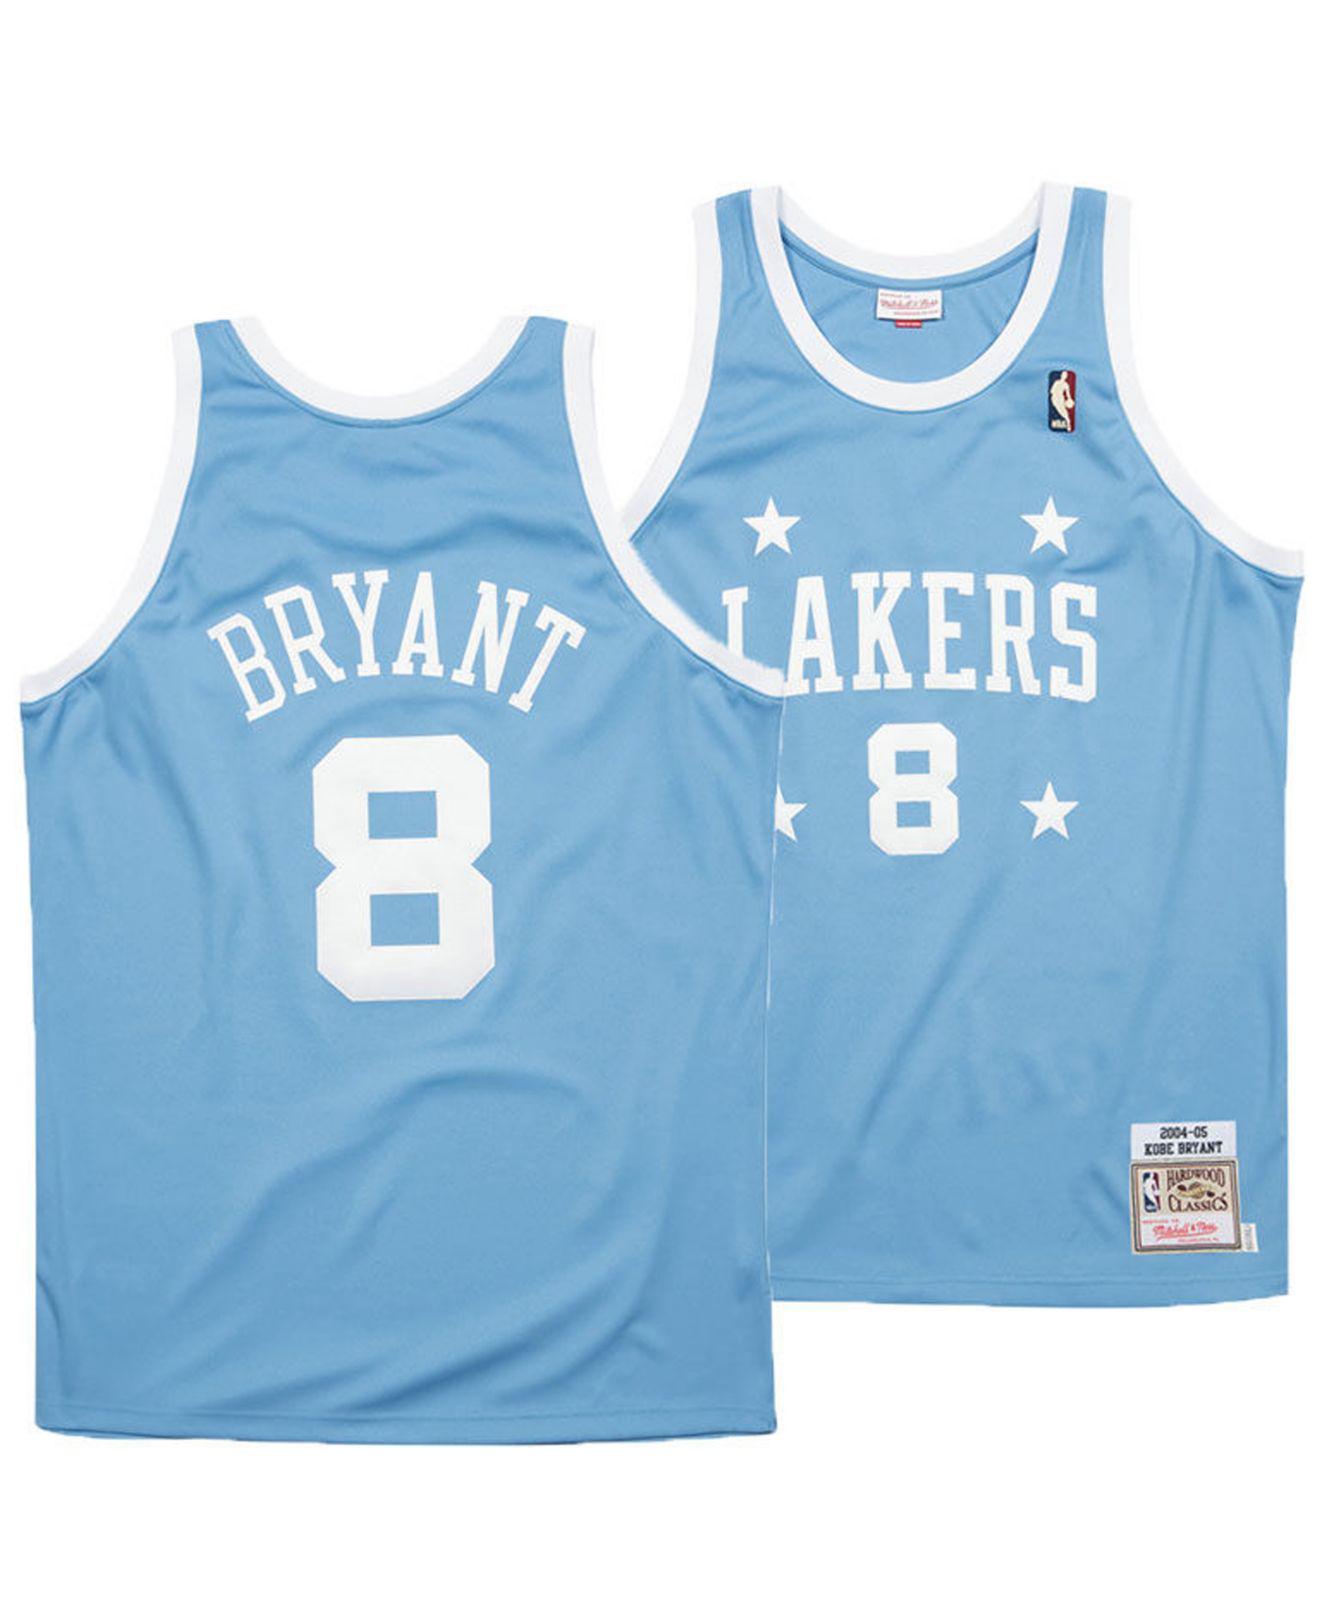 Mitchell & Ness Synthetic Kobe Bryant Los Angeles Lakers Authentic ...